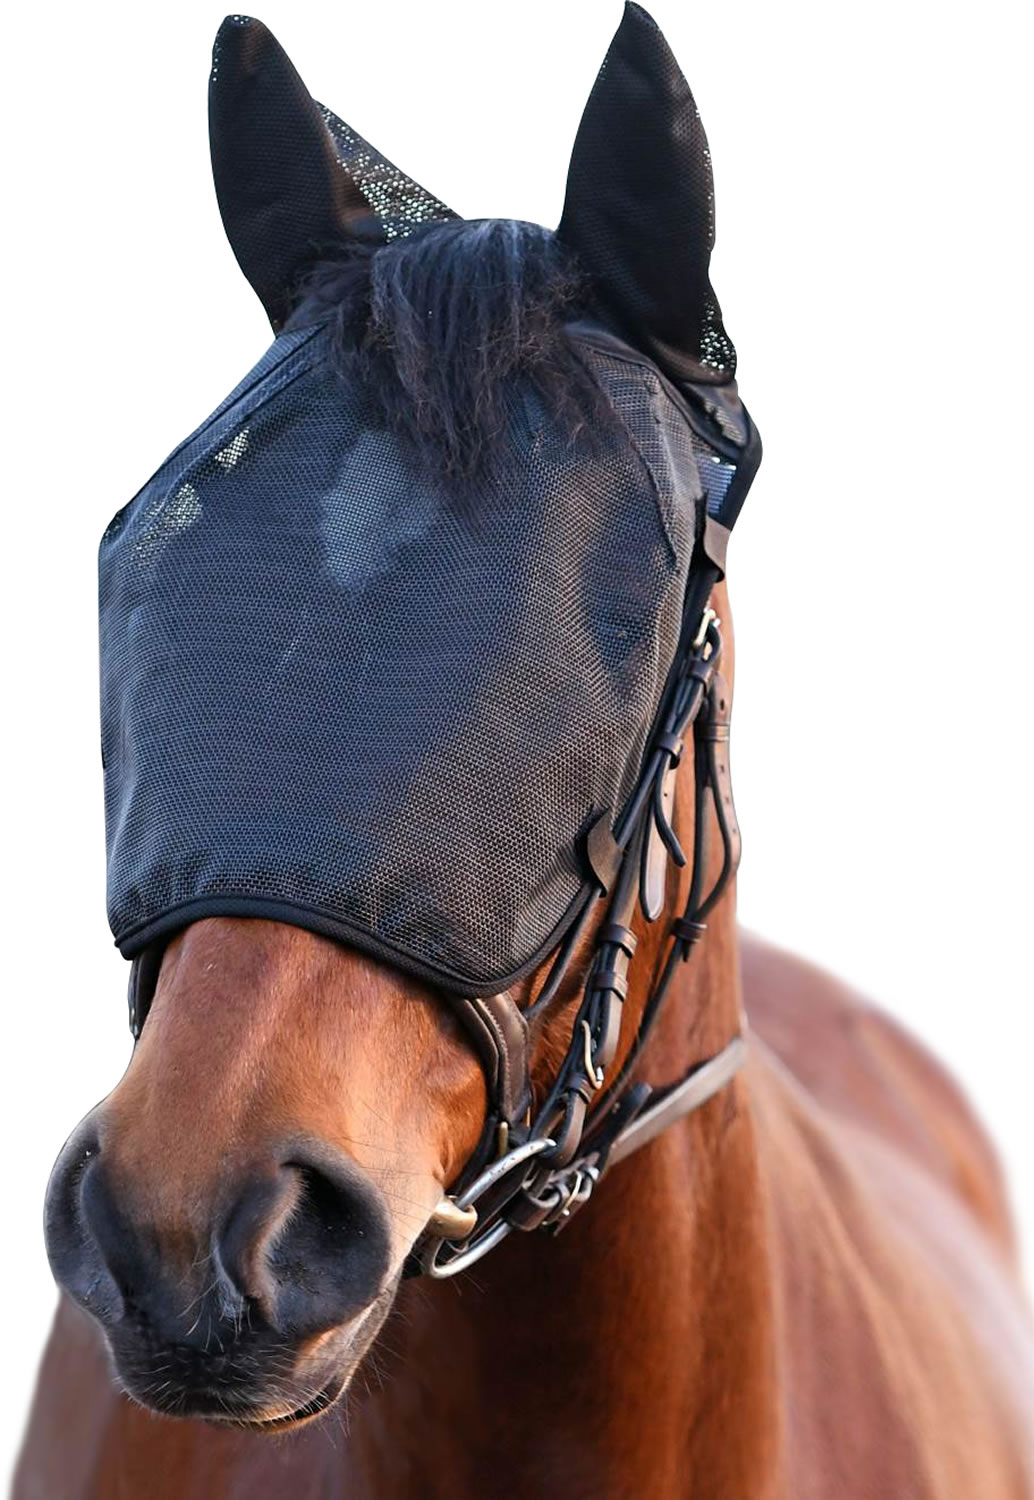 Equilibrum Net Relief riding Mask